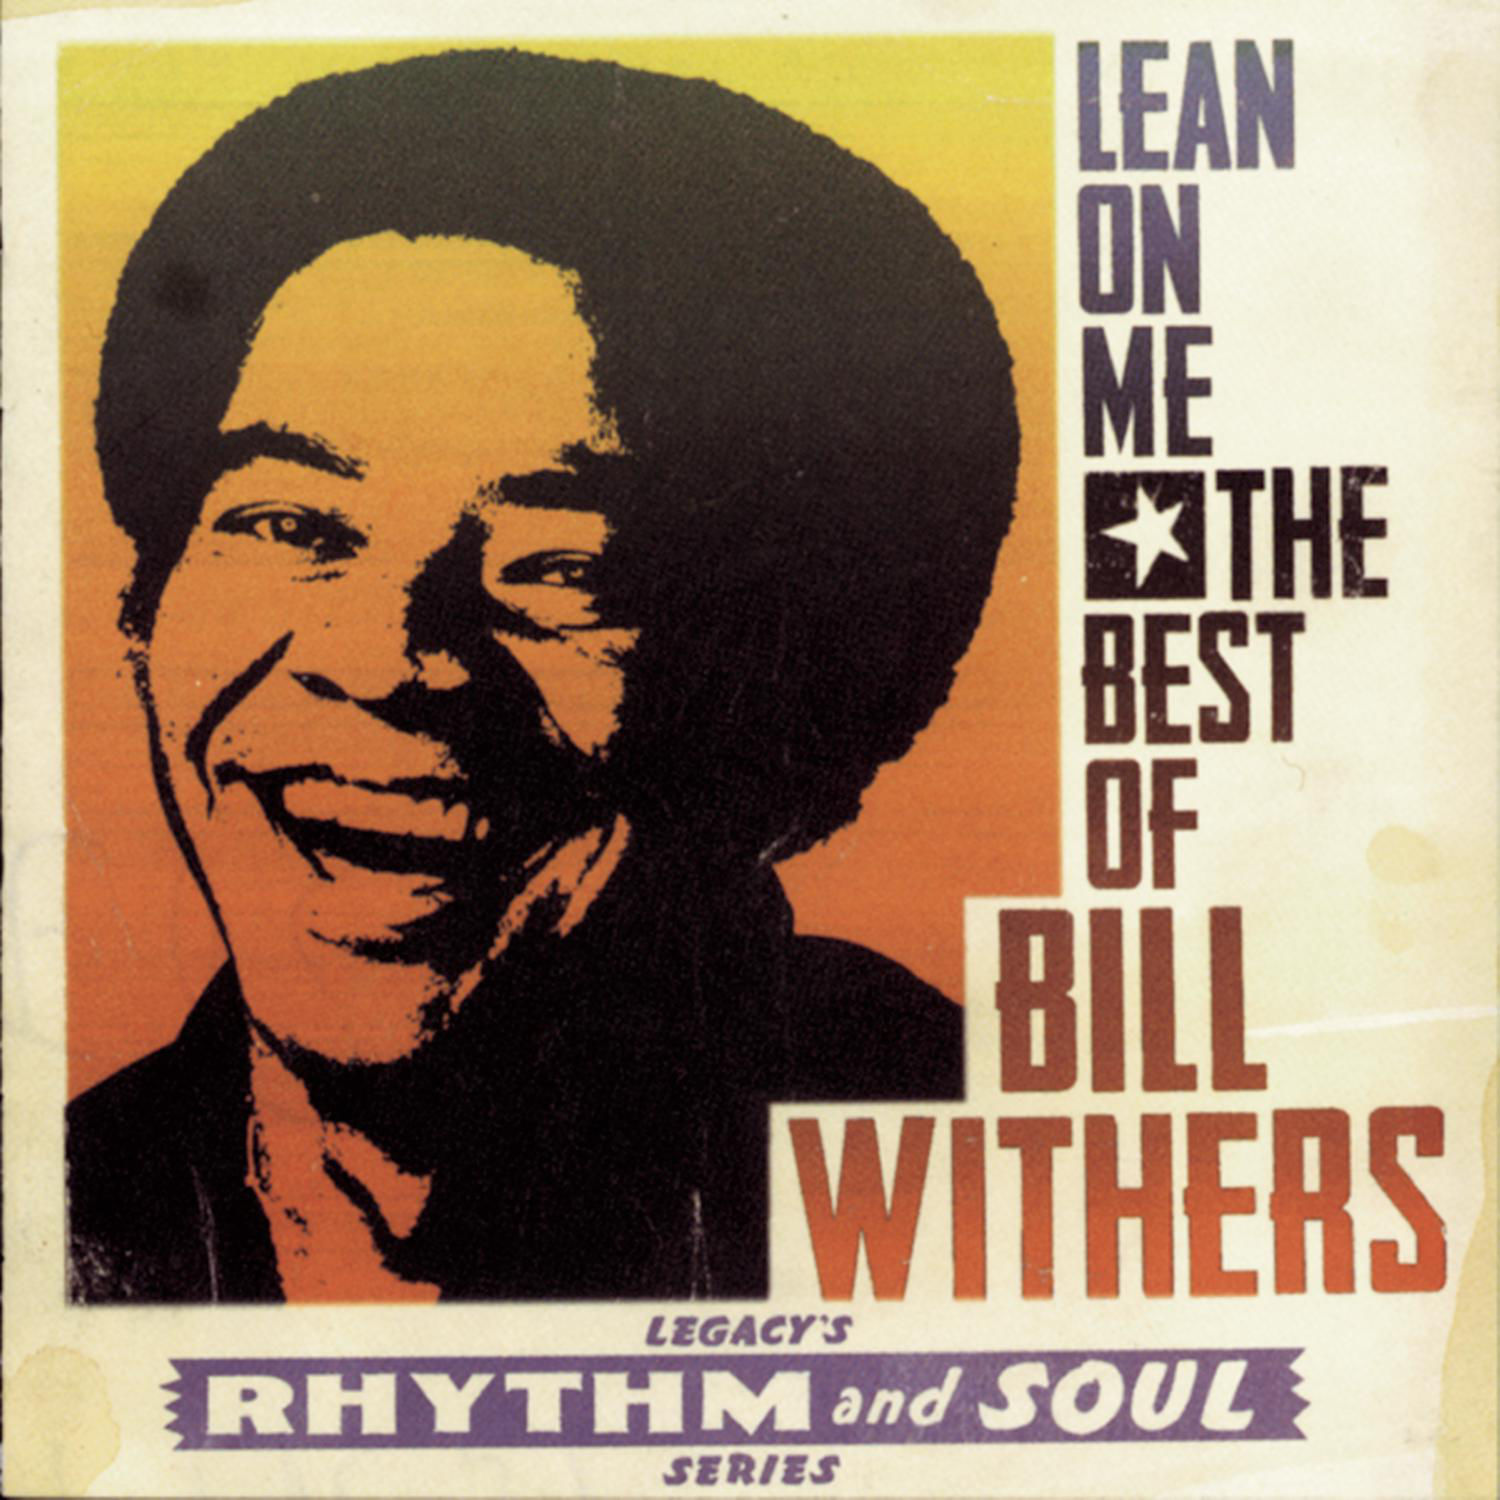 Bill withers best of lean on me torrent